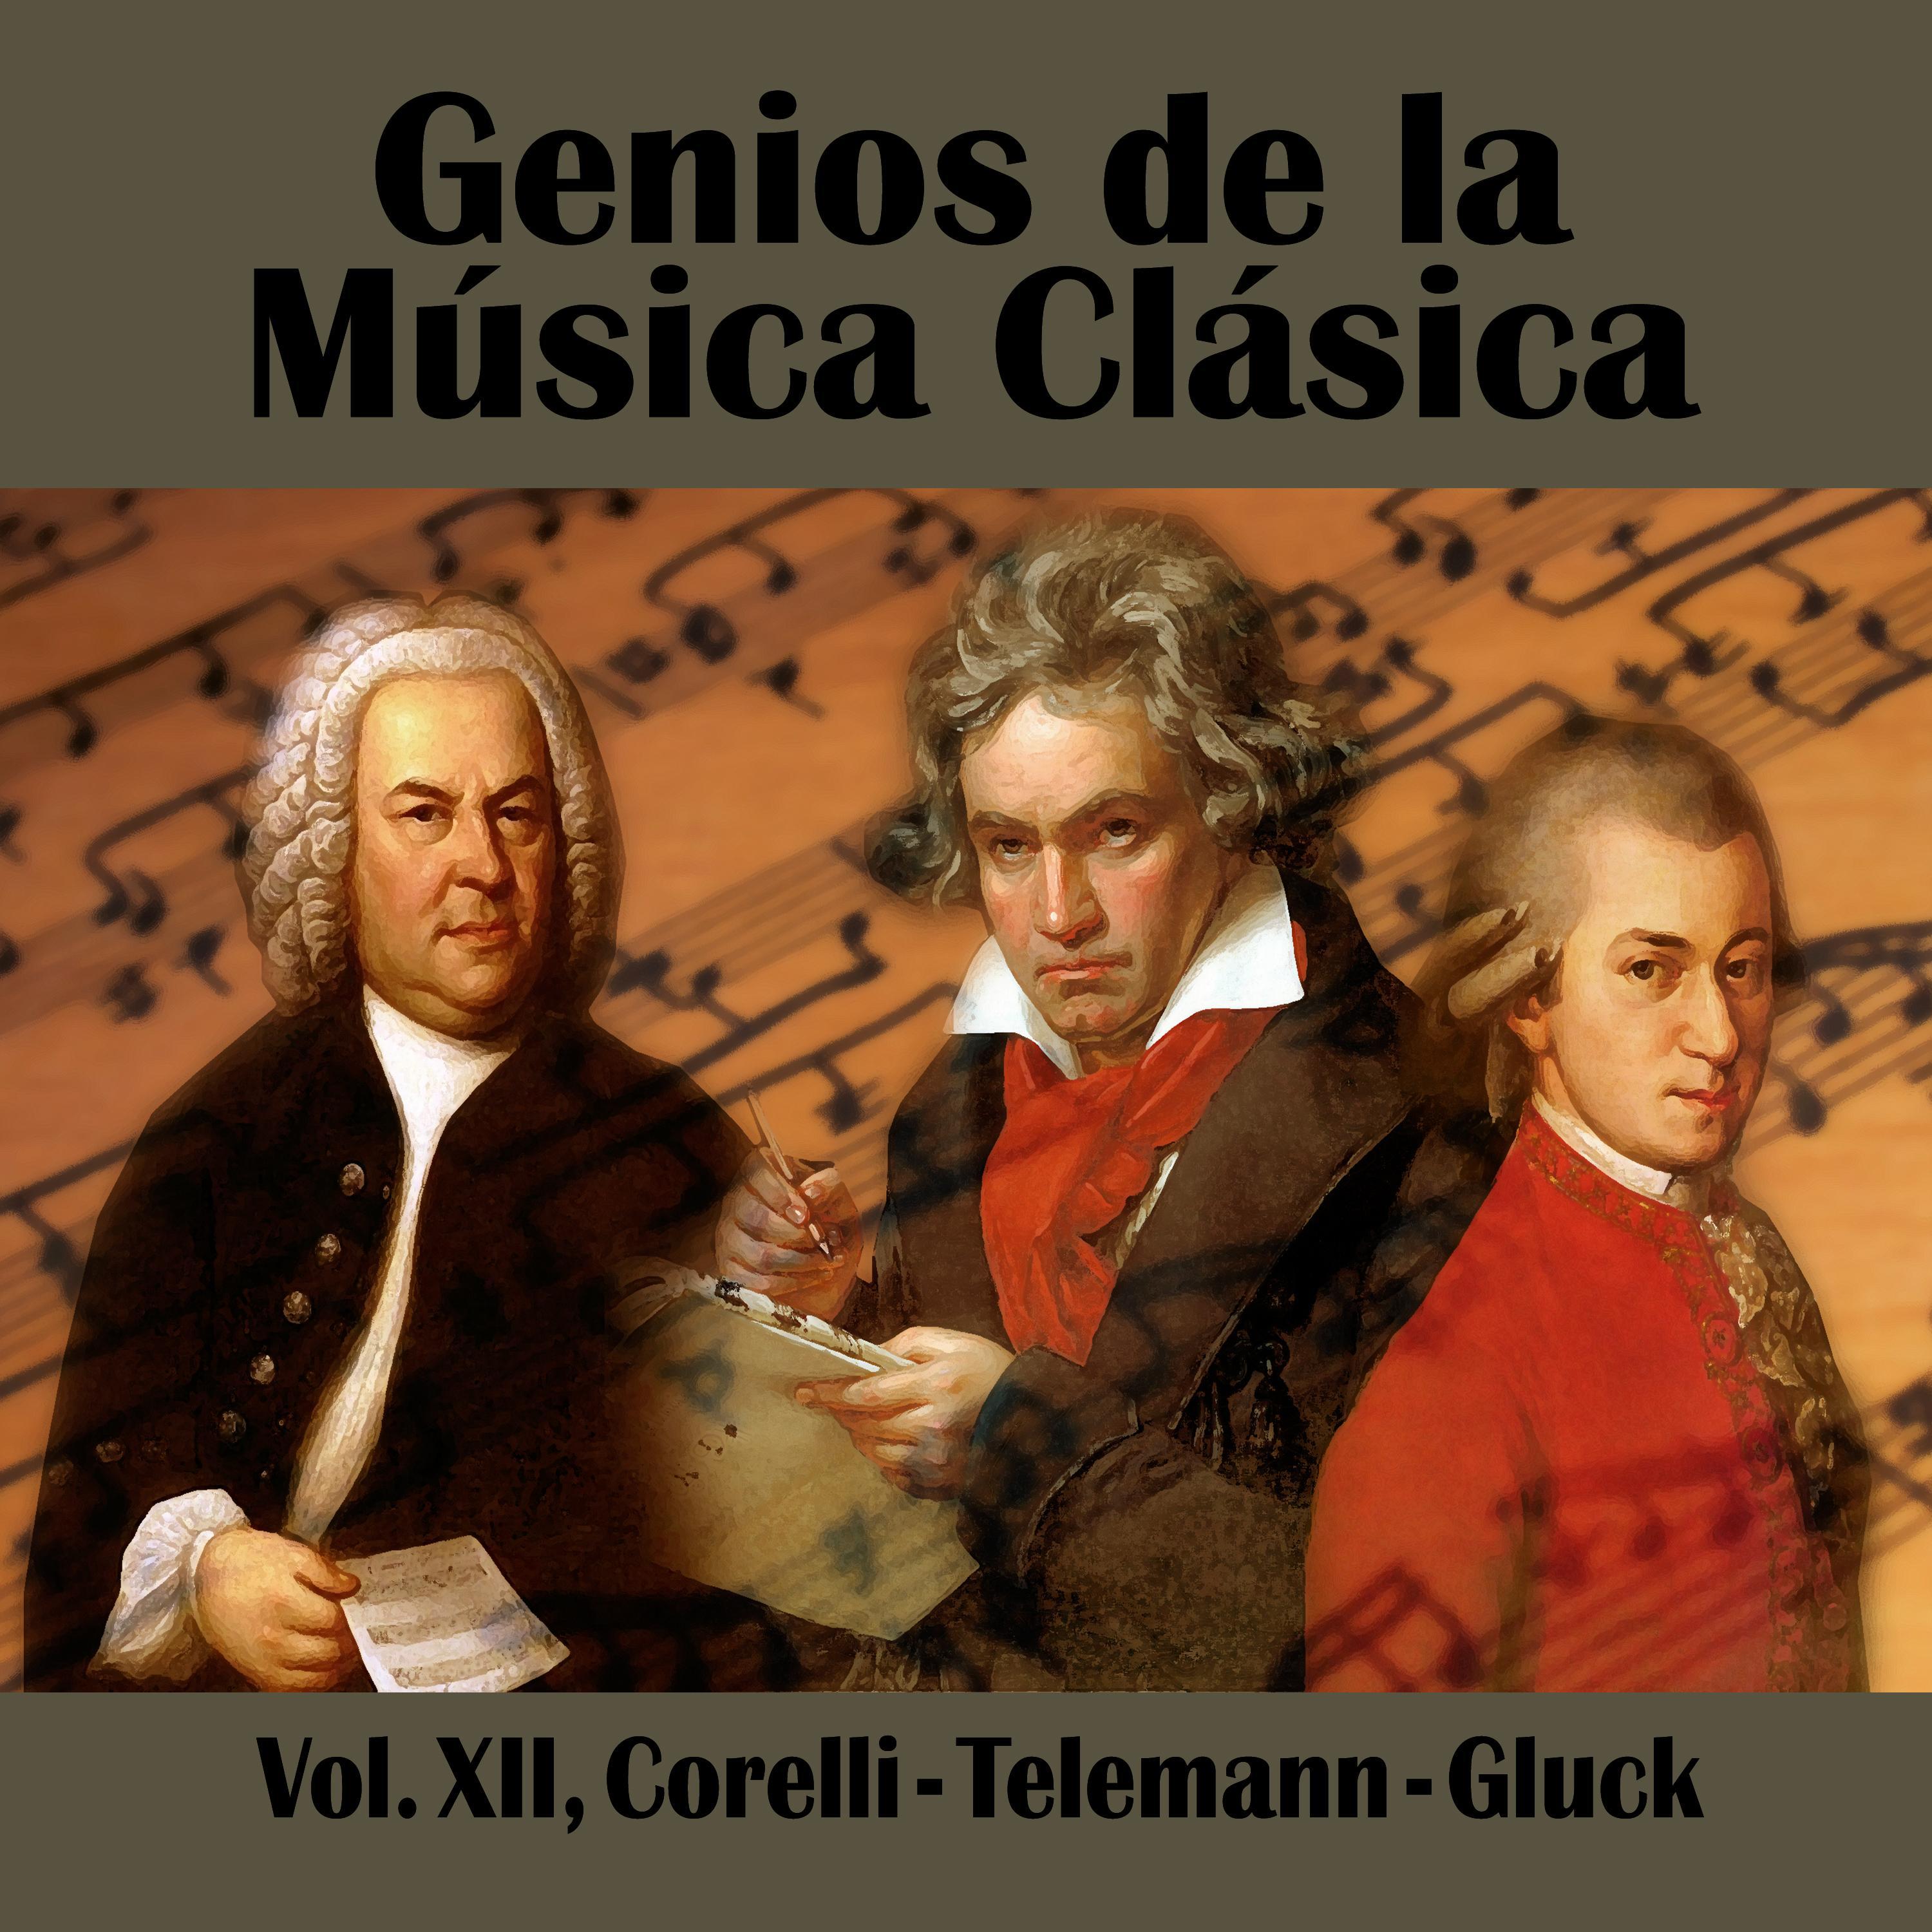 Georg Philipp Telemann - Two Flutes and Strings Suite No. 1 in E Minor, 